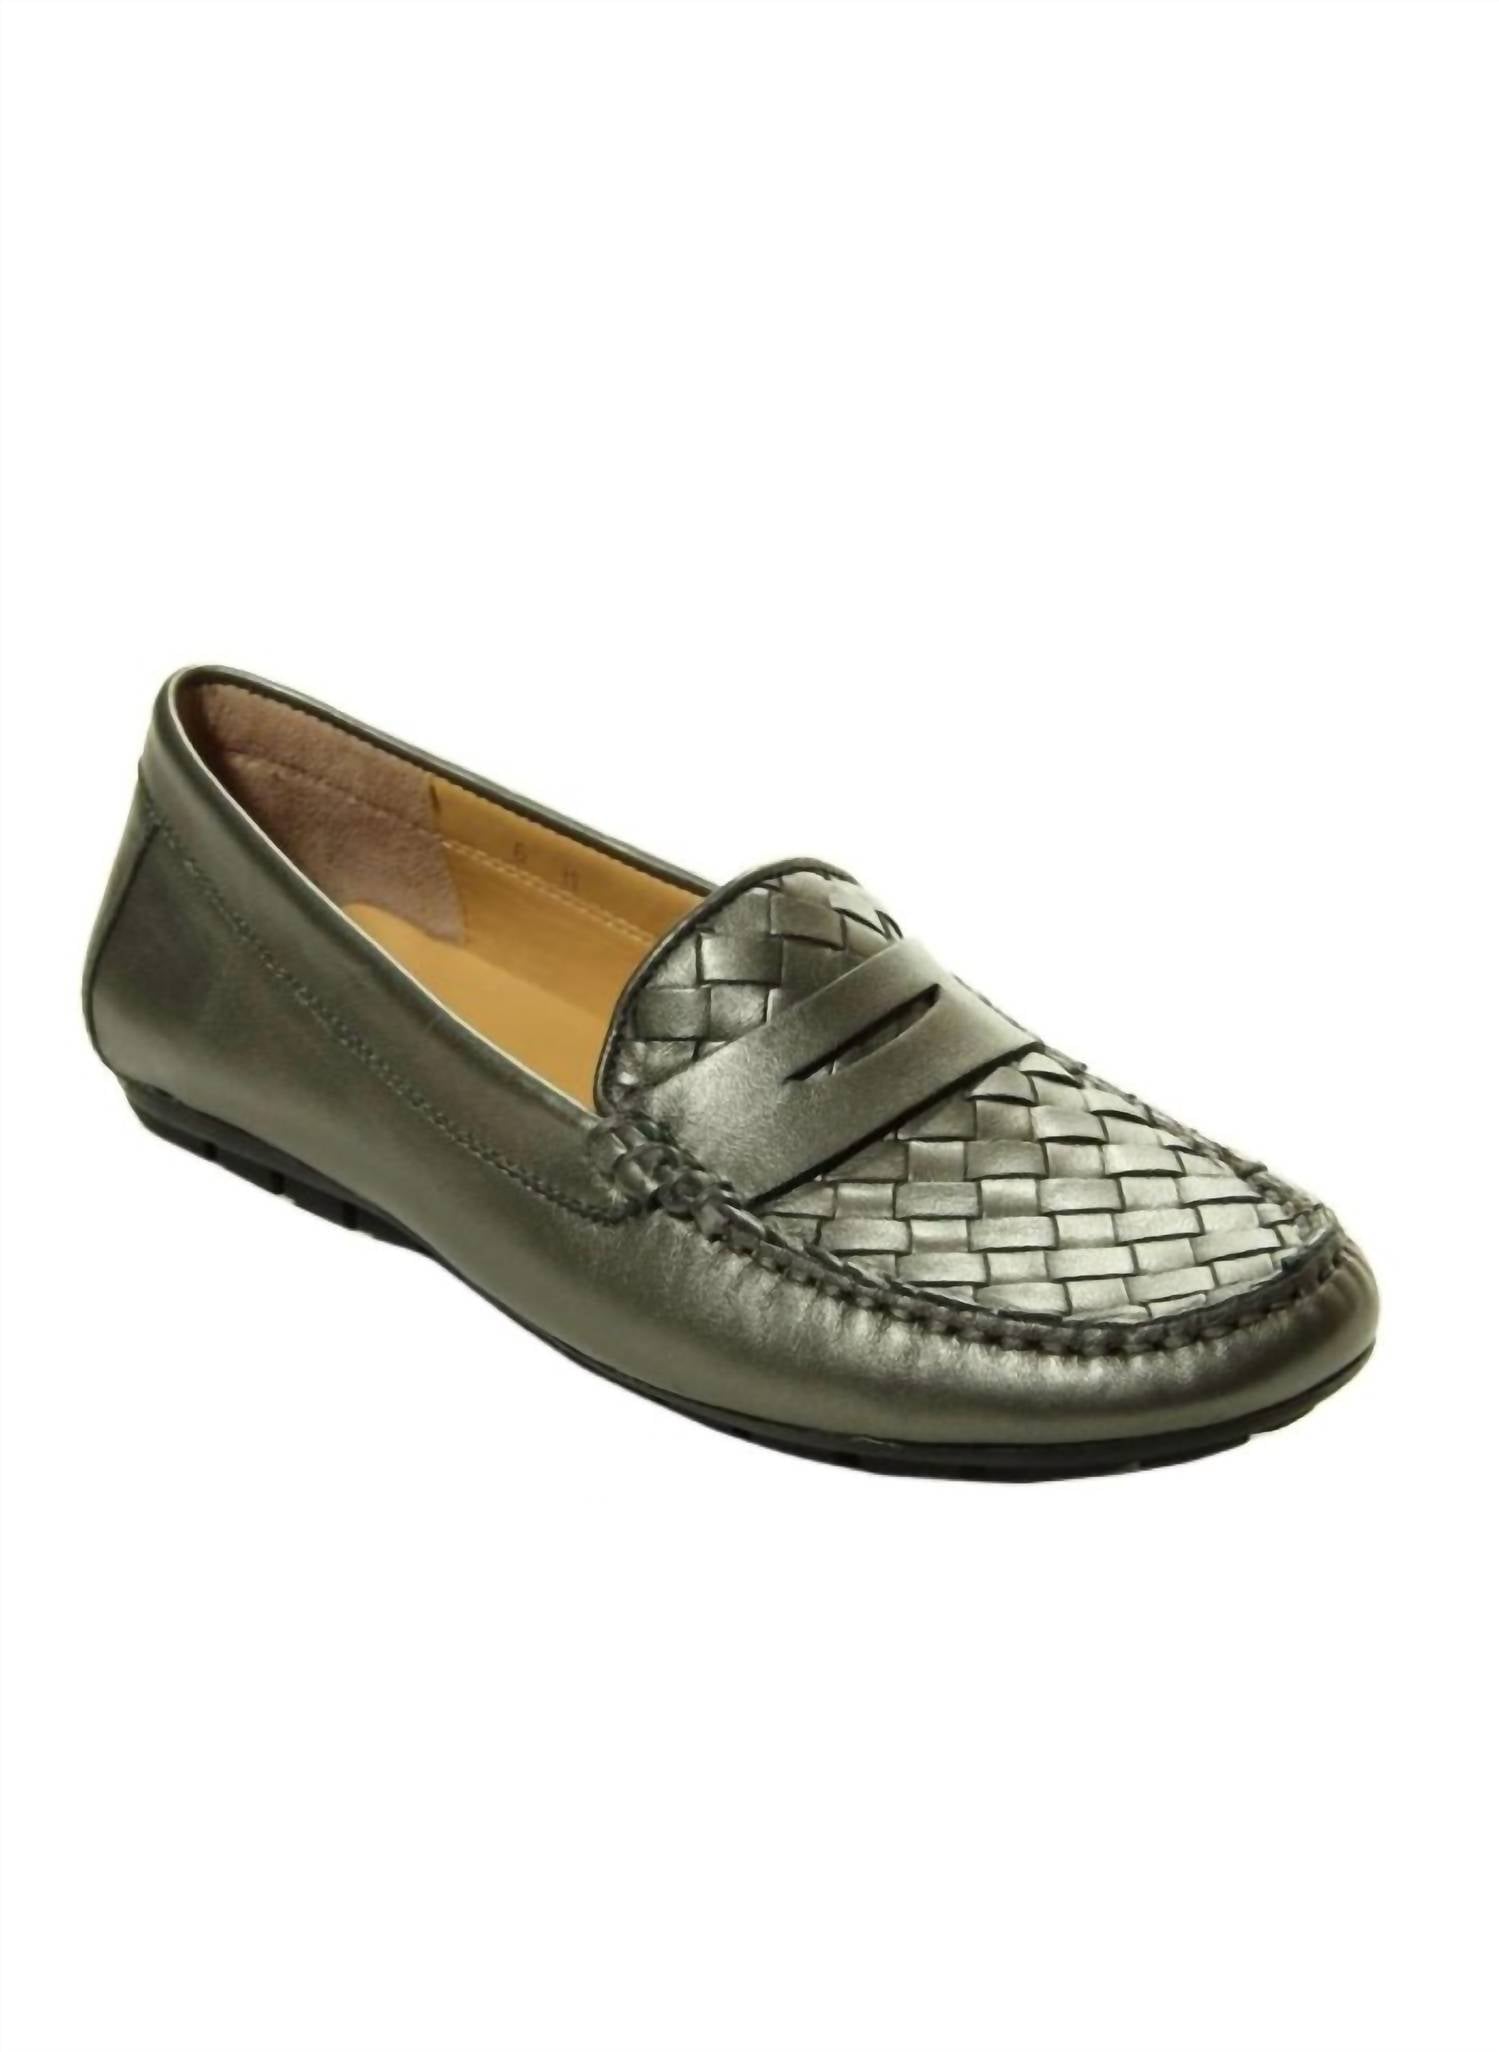 VANELI Adrik Woven Loafer in Pewter Pearl Leather